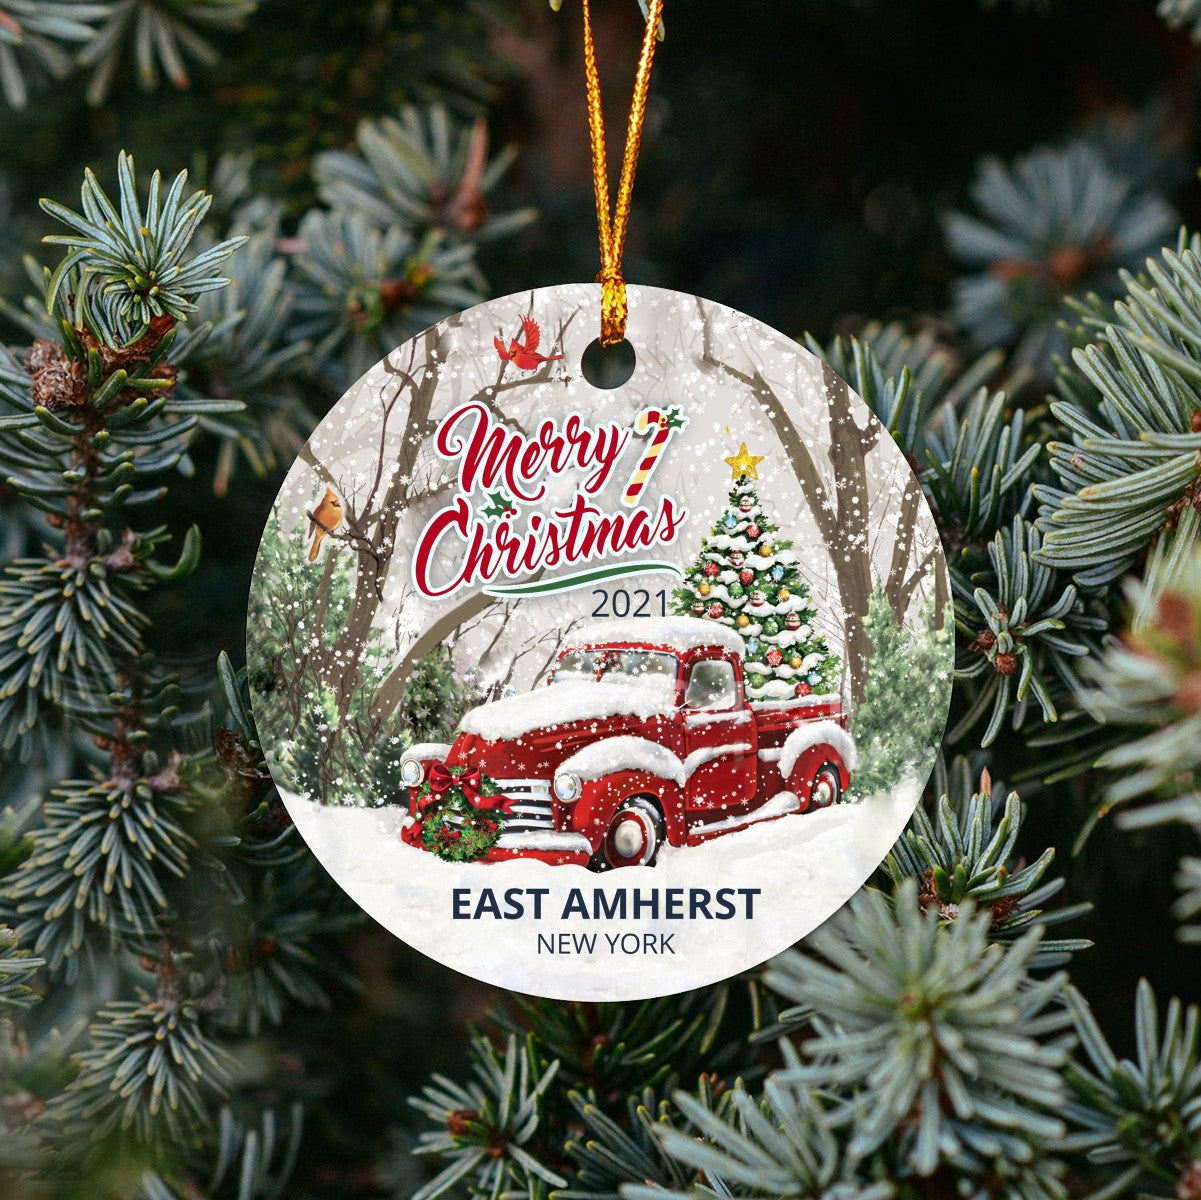 Christmas Tree Ornaments East Amherst - Ornament With Name City, State East Amherst New York NY Ornament - Red Truck Xmas Ornaments 3'' Plastic Gift For Family, Friend And Housewarming